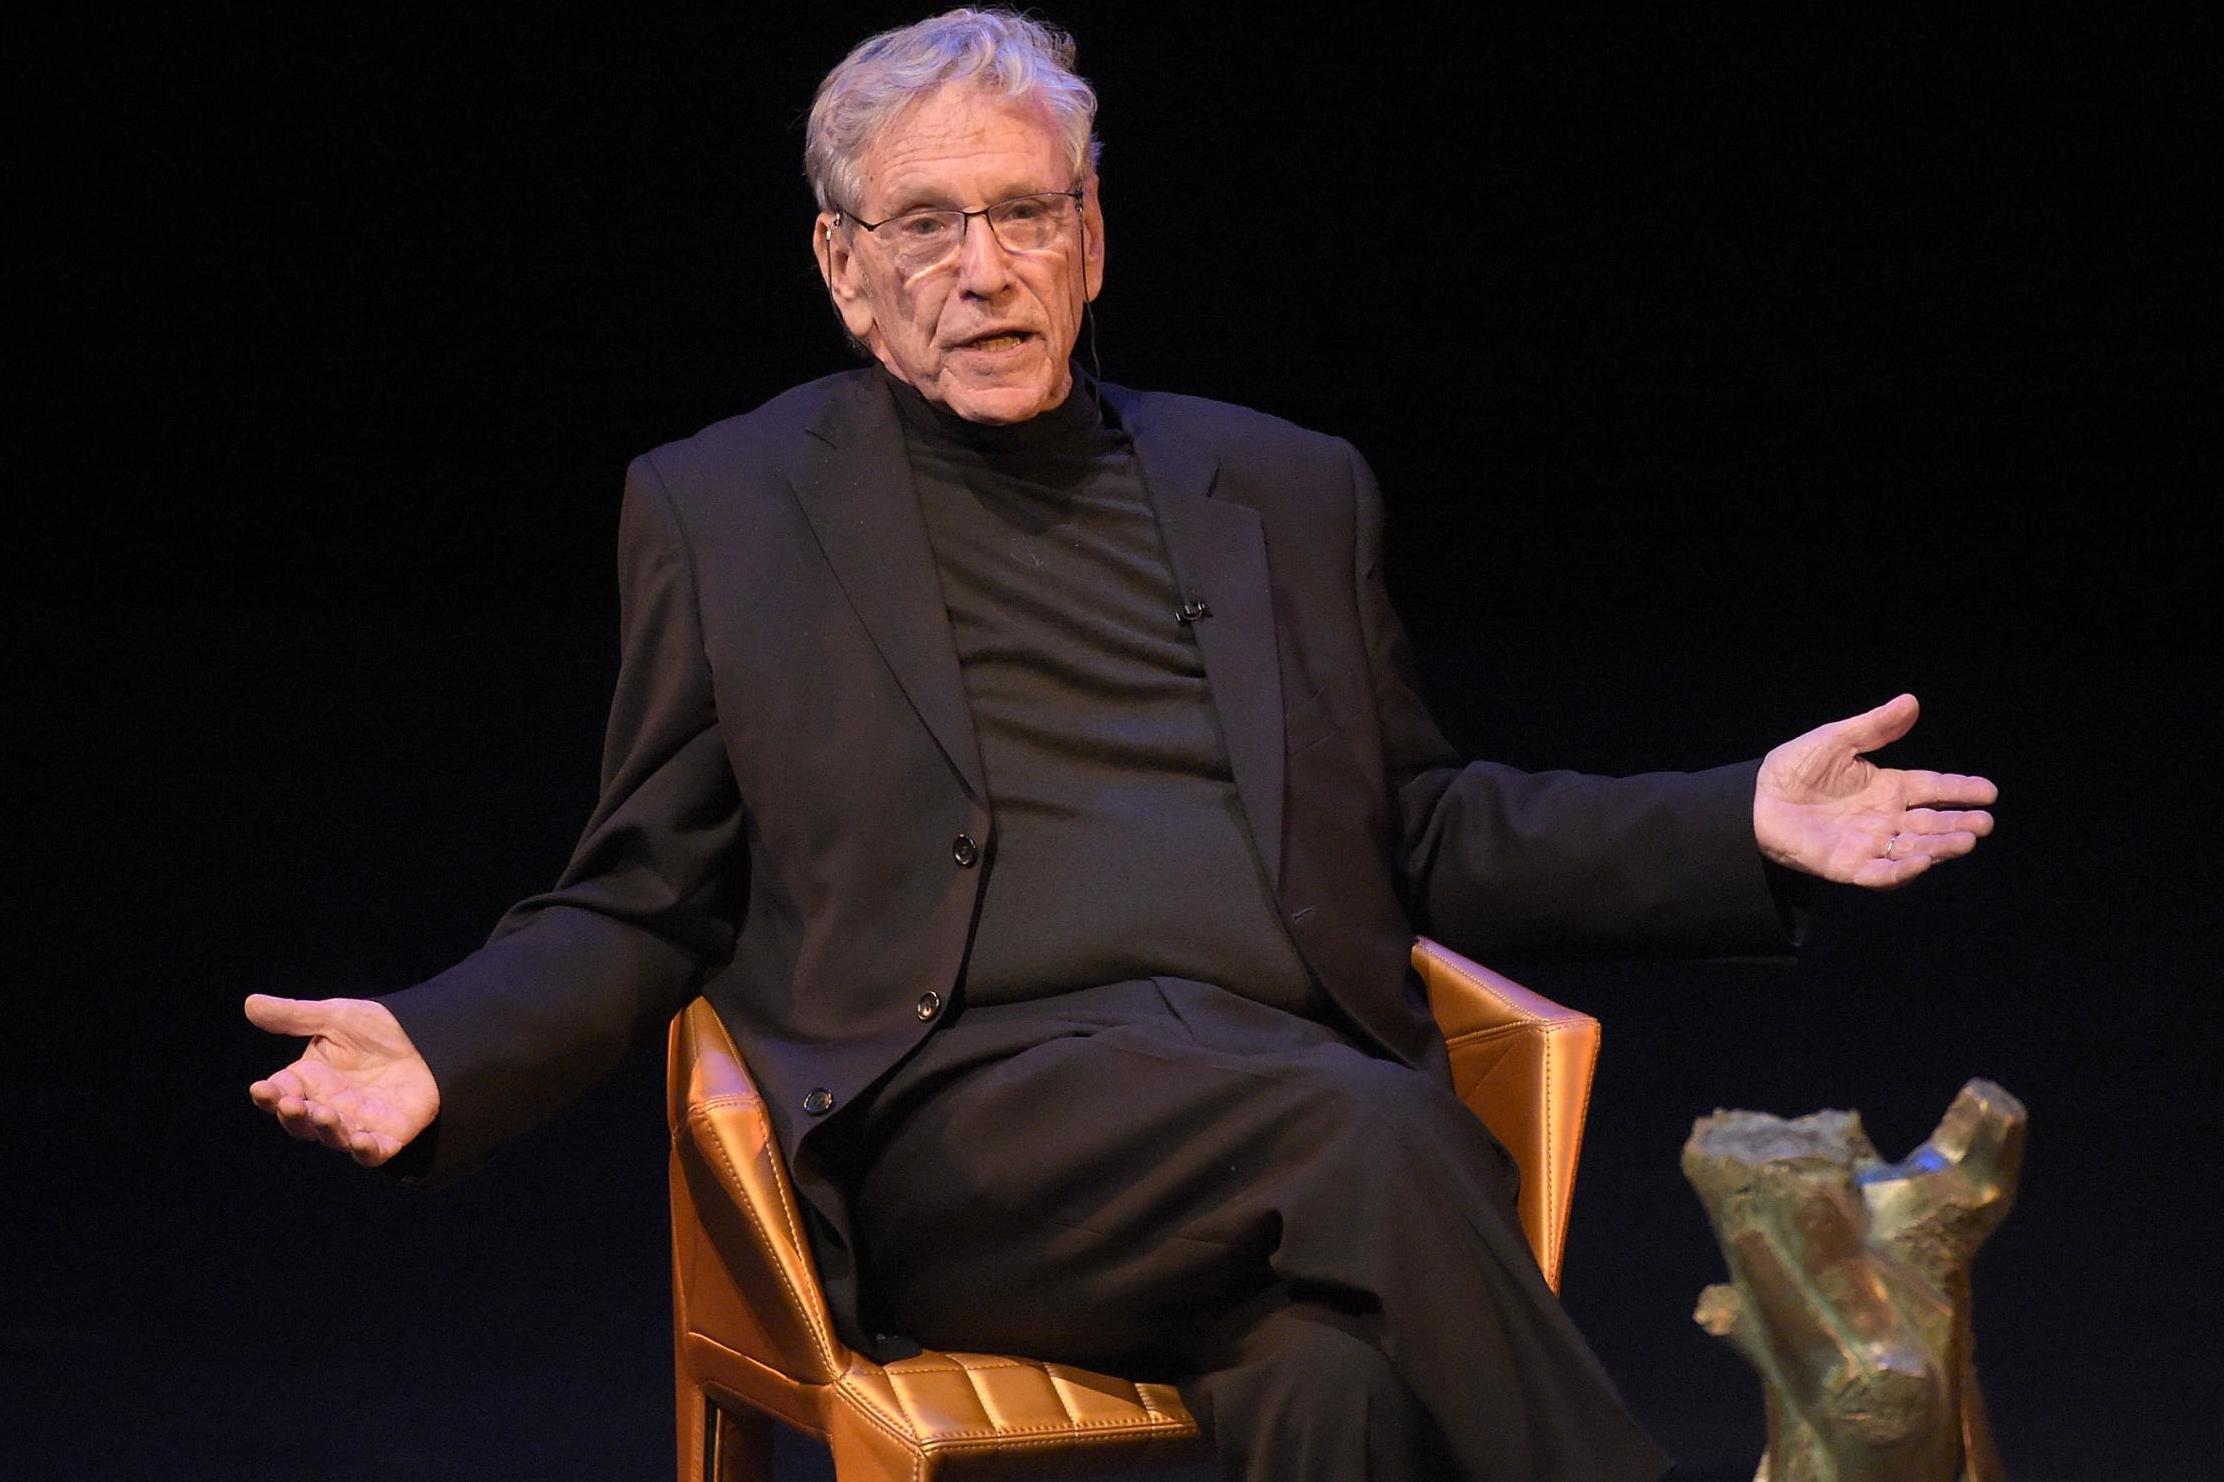 Author Amos Oz attends the UCLA Younes &amp; Soraya Nazarian Center For Israel Studies 5th Annual Gala at Wallis Annenberg Center for the Performing Arts on 5 May 5, 2015 in Beverly Hills, California. (Photo by Jason Kempin/Getty Images)